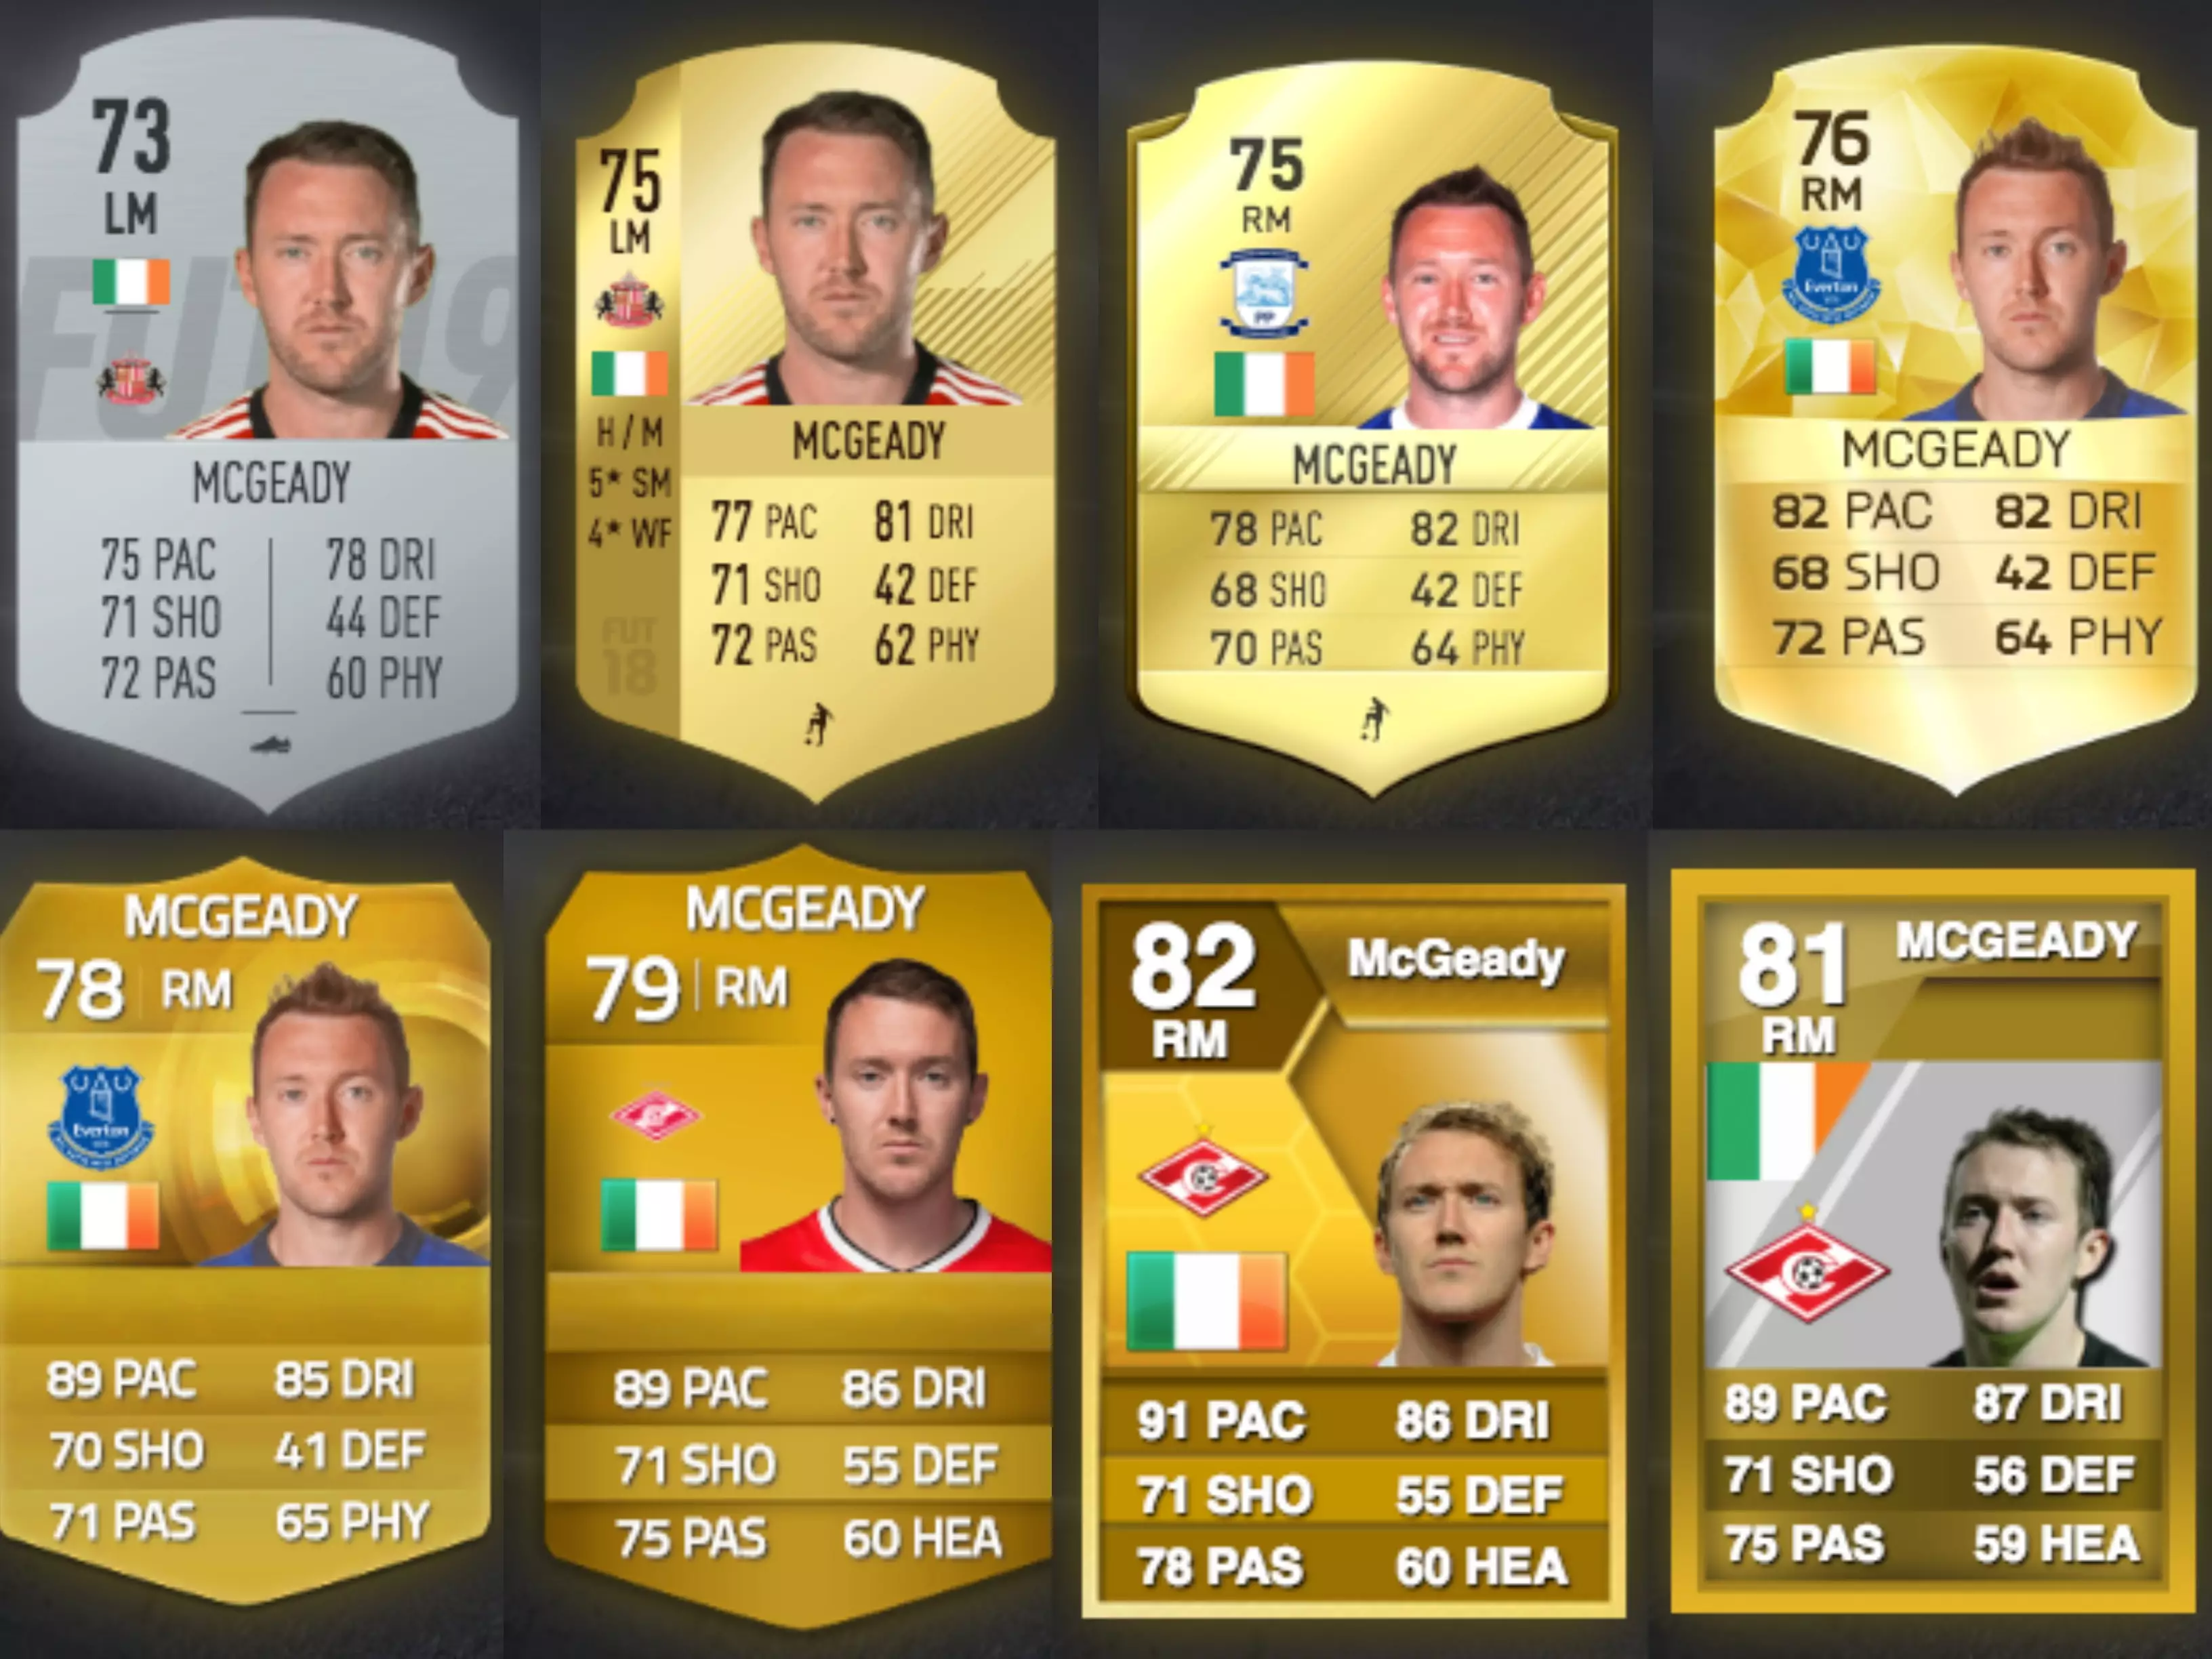 Five-star McGeady from FIFA 19 to FIFA 12 (left to right).